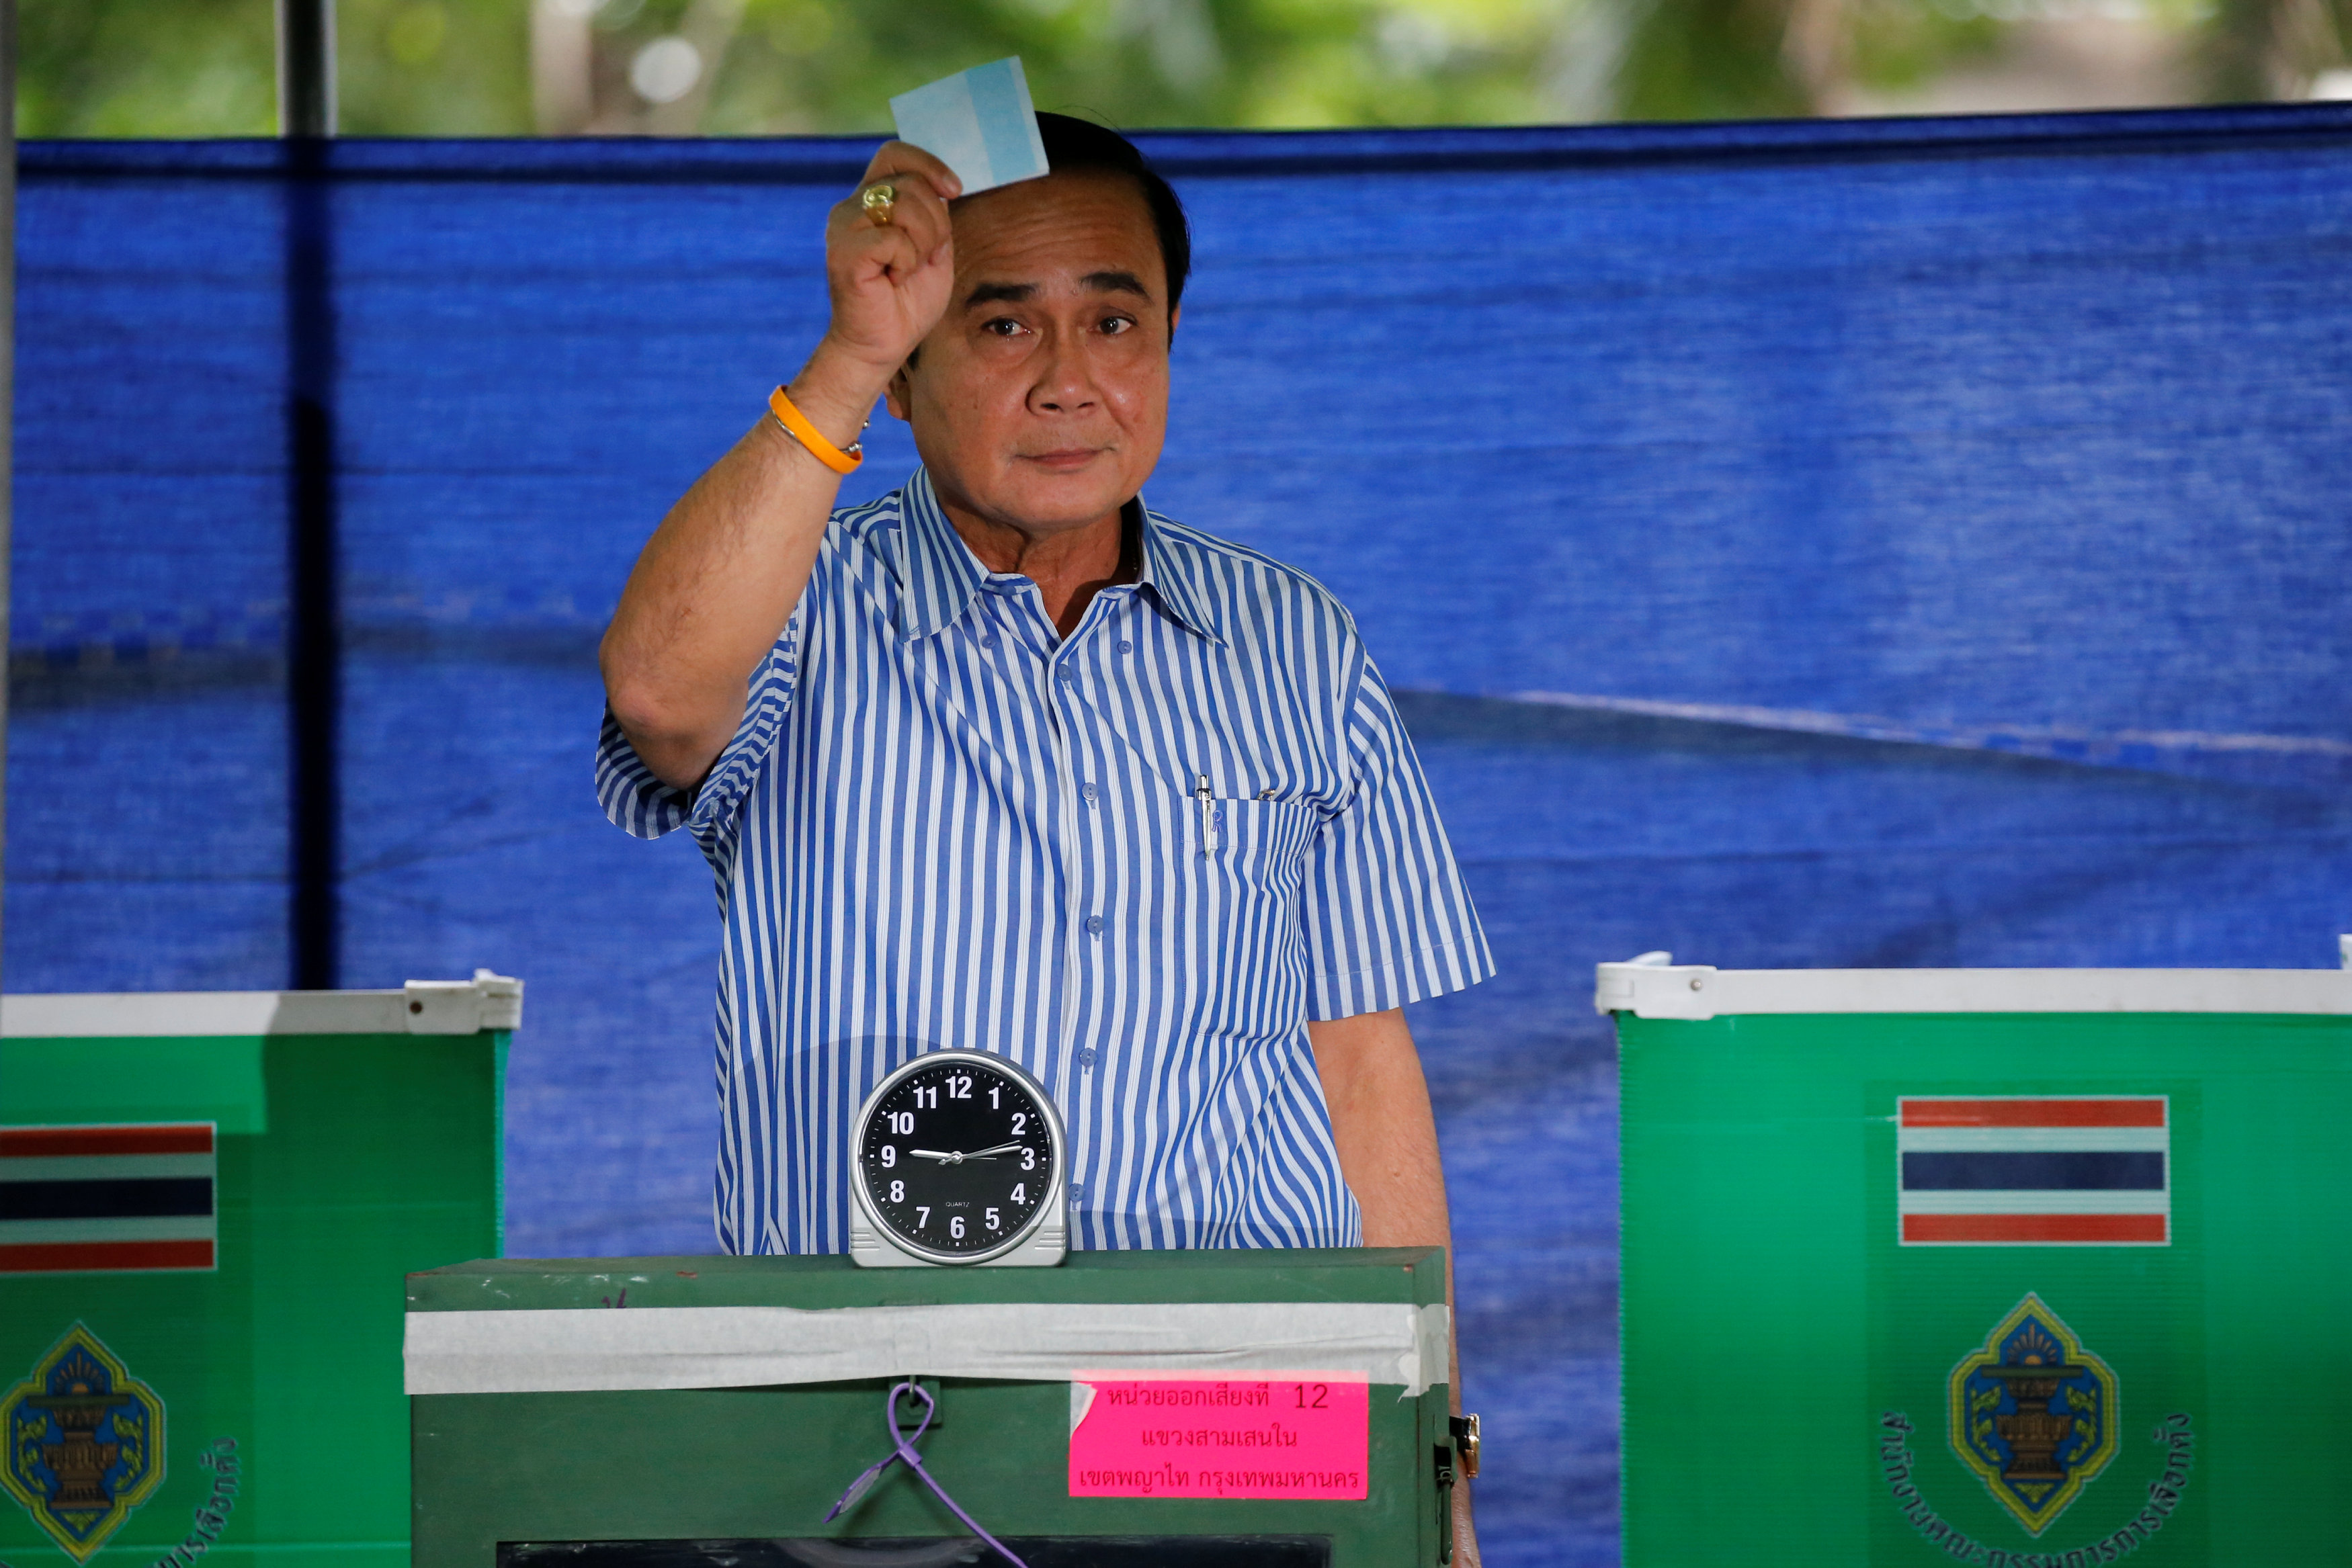 Thai Prime Minister Prayuth Chan-ocha casts his ballot at a polling station during a constitutional referendum vote in Bangkok, Thailand, August 7, 2016. u00e2u20acu201d Reuters pic